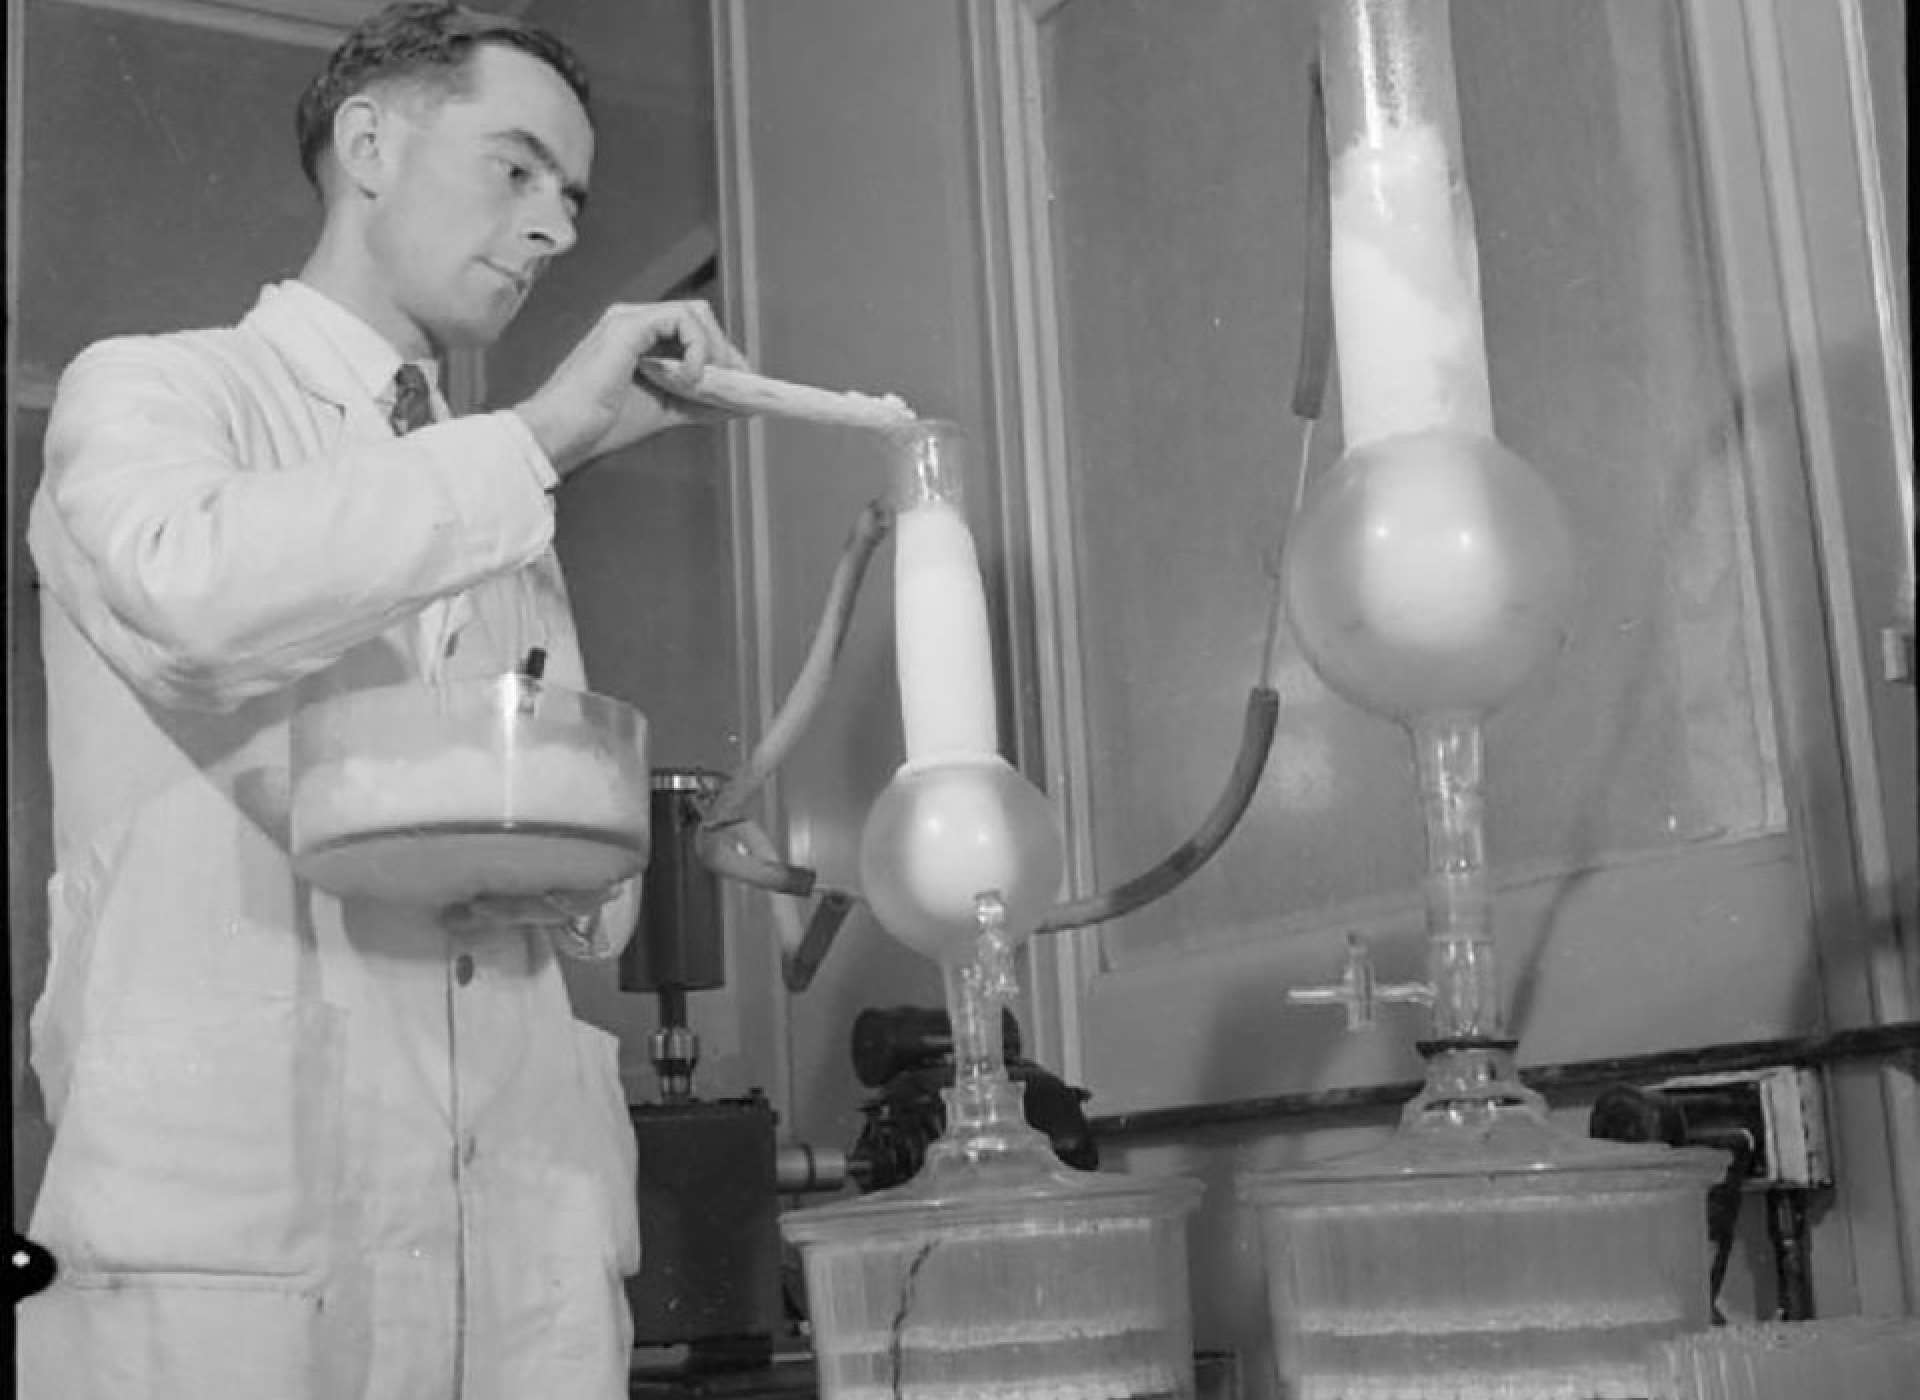 A technician from Merck purifying penicillin in 1942. From the Imperial War Museum 43467, in the public domain.